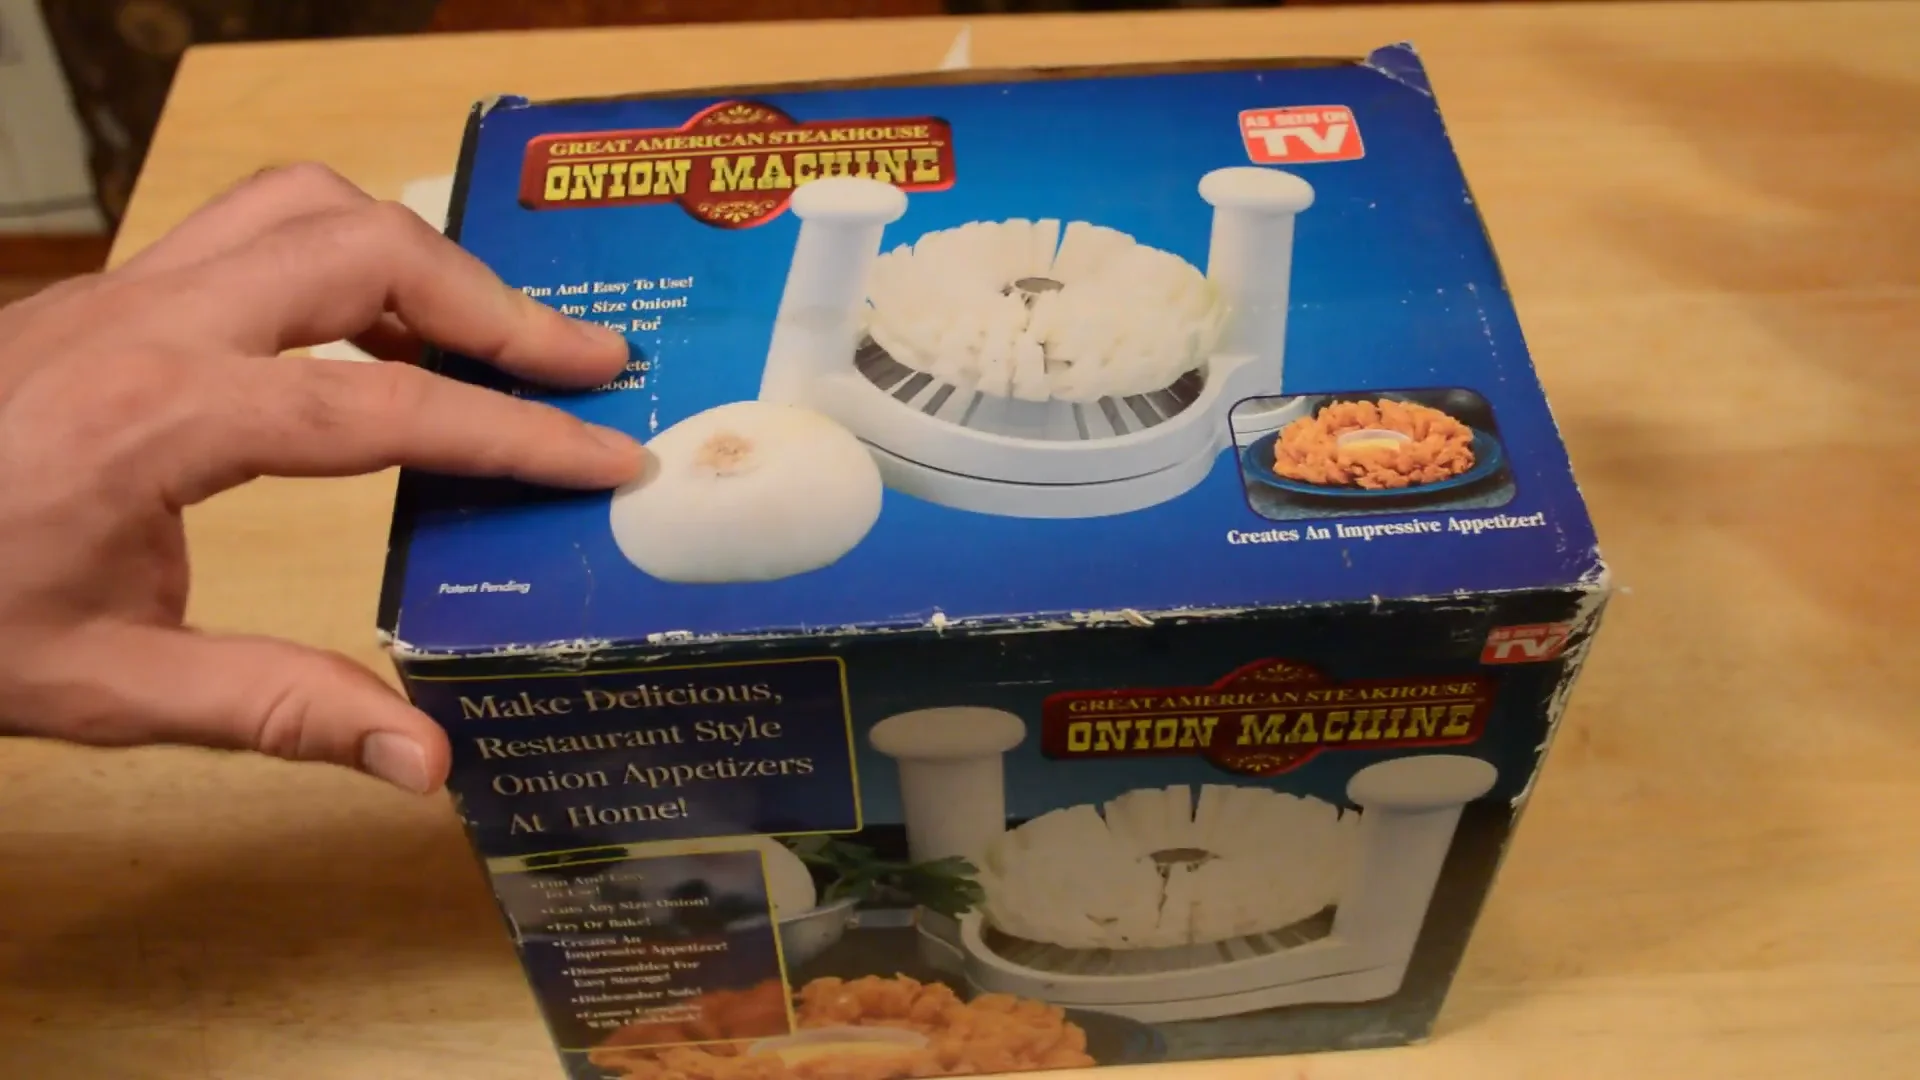 Great American Steakhouse Onion Machine - household items - by owner -  housewares sale - craigslist